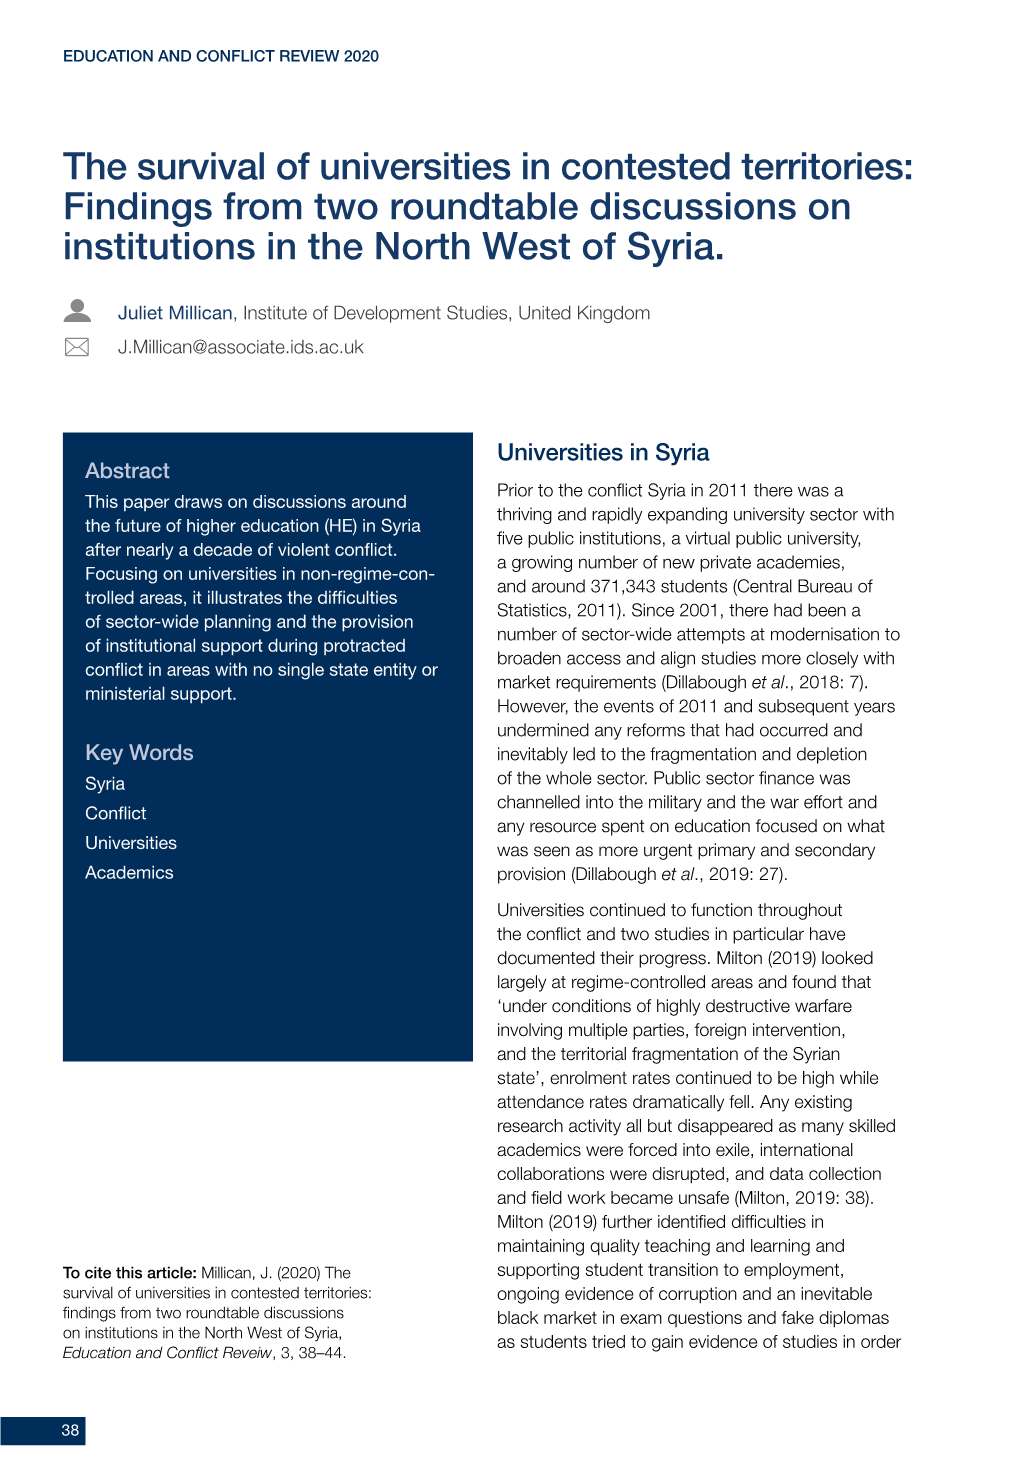 Findings from Two Roundtable Discussions on Institutions in the North West of Syria